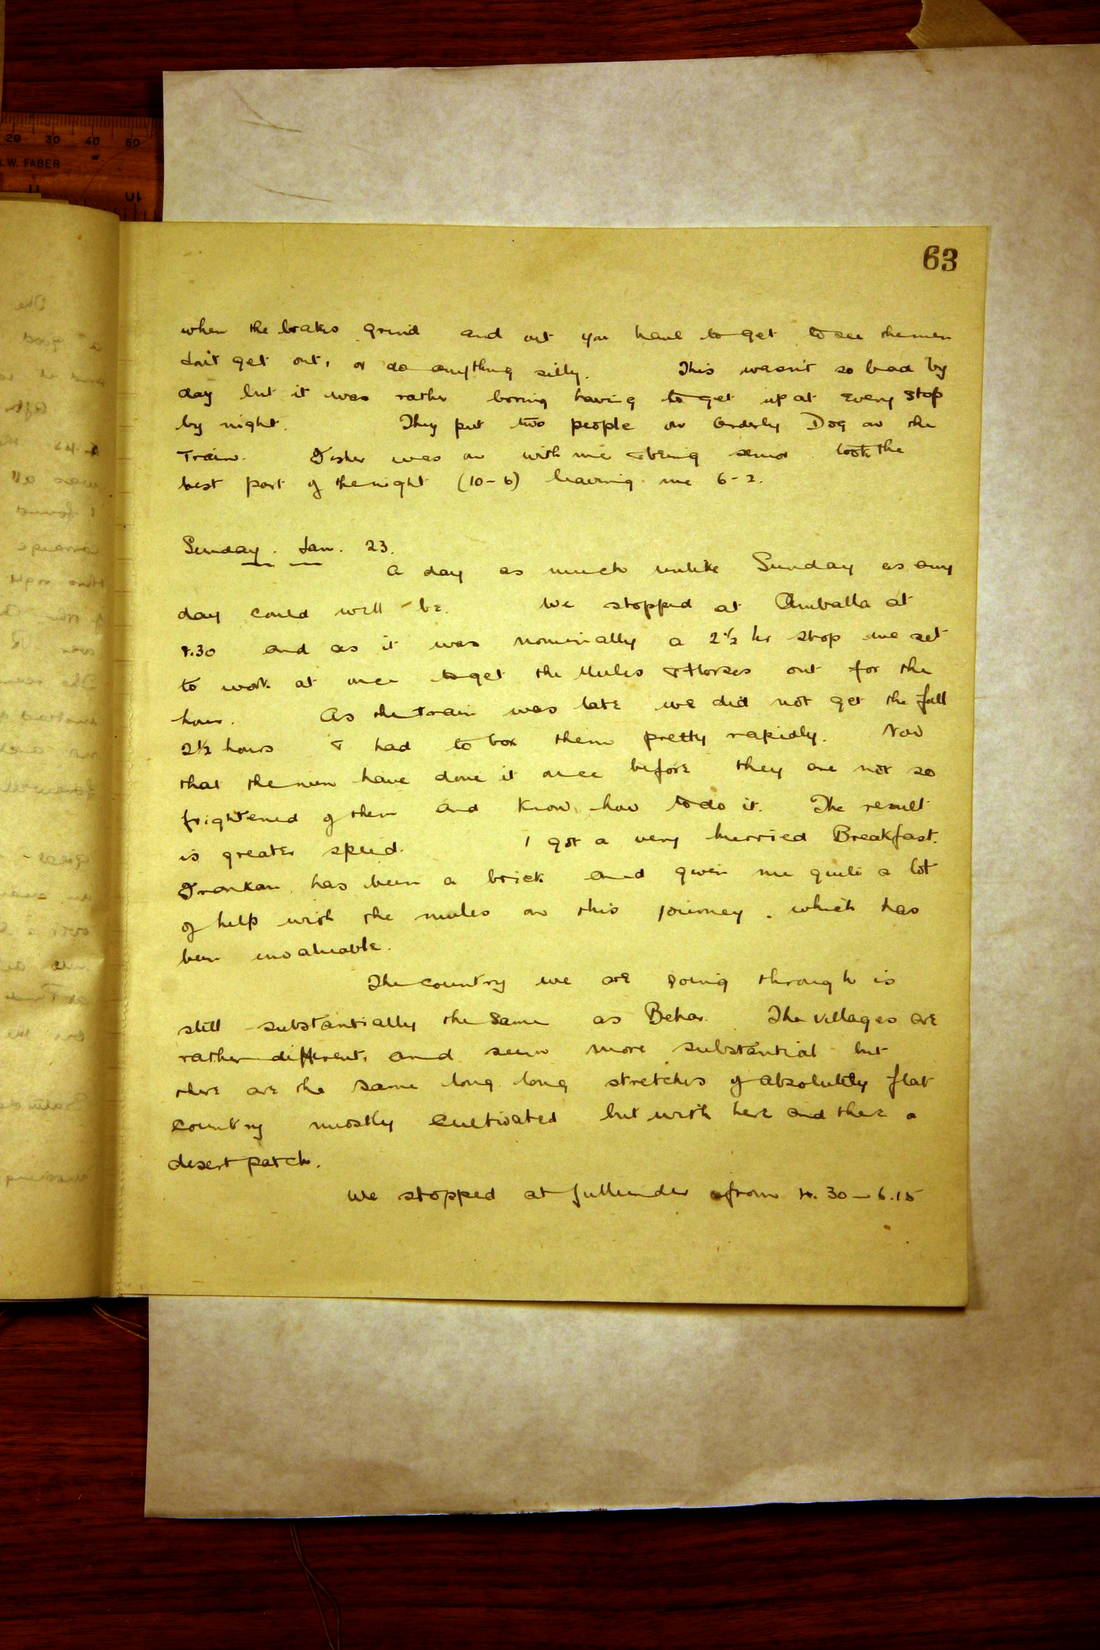 Scanned image of page book11 img_15047.jpg